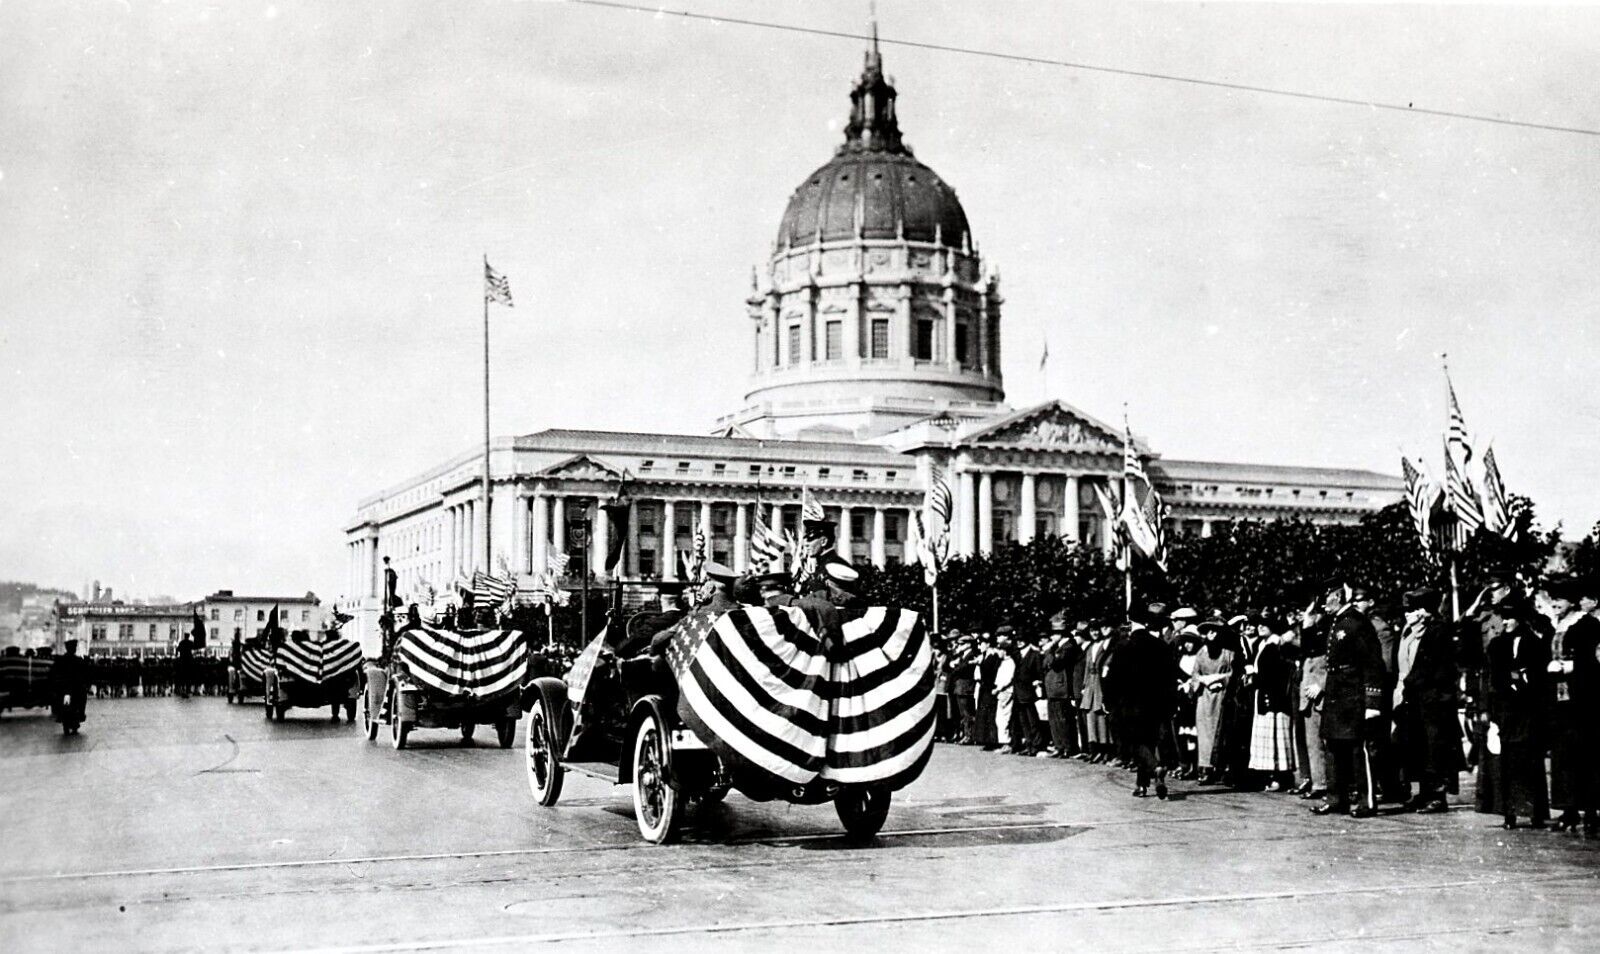 c.1919 SAN FRANCISCO CIVIC CENTER CITY HALL PARADE of CARS with BANNERS~NEGATIVE